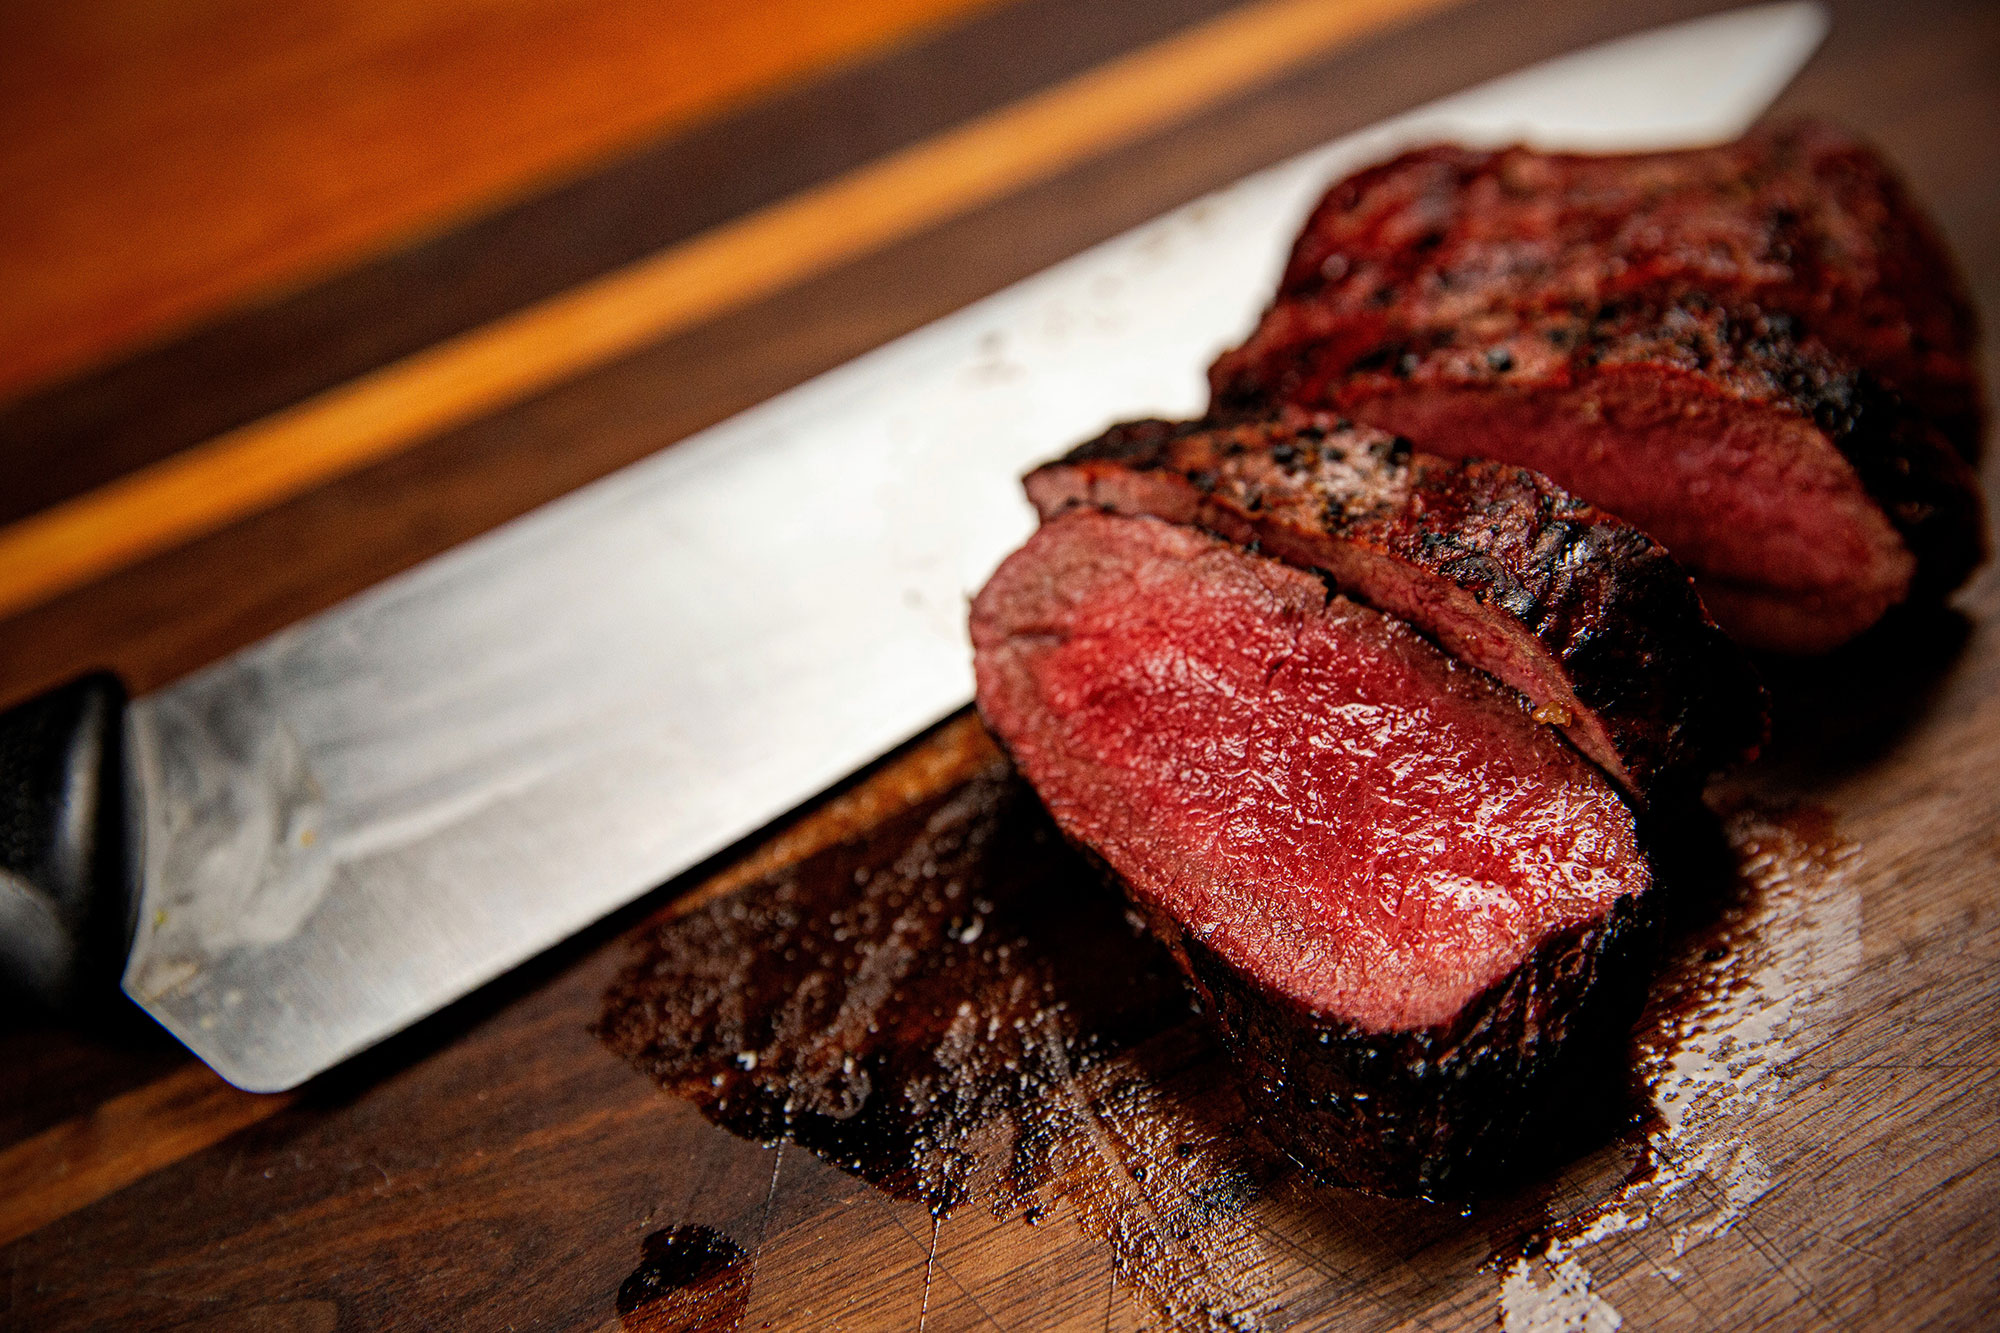 A perfectly cooked medium-rare venison steak on a cutting board.